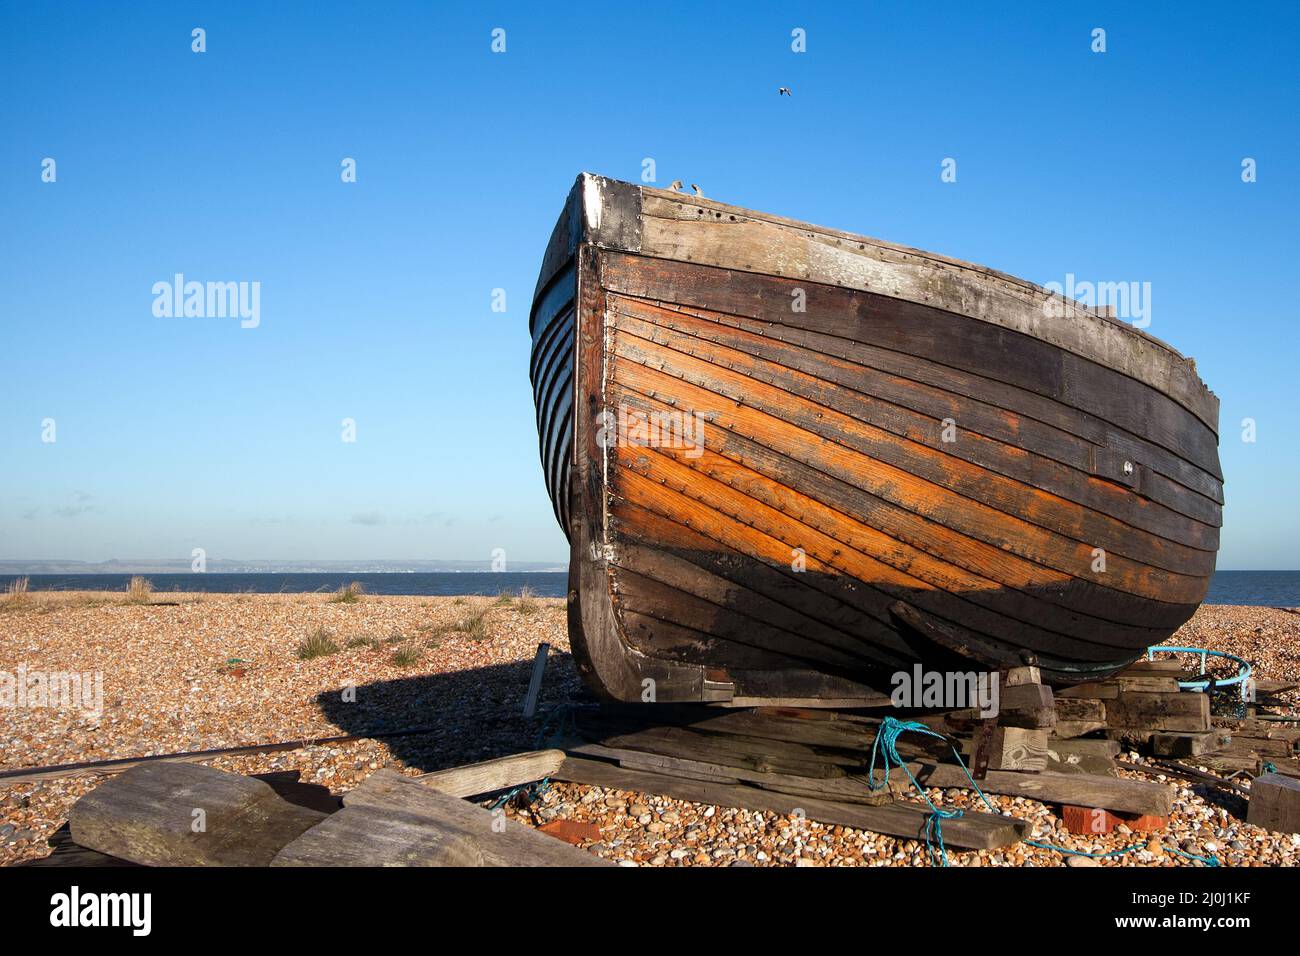 DUNGENESS, KENT, UK - DECEMBER 17 :  Beached Rowing Boat at Dungeness in Kent on December 17, 2008 Stock Photo